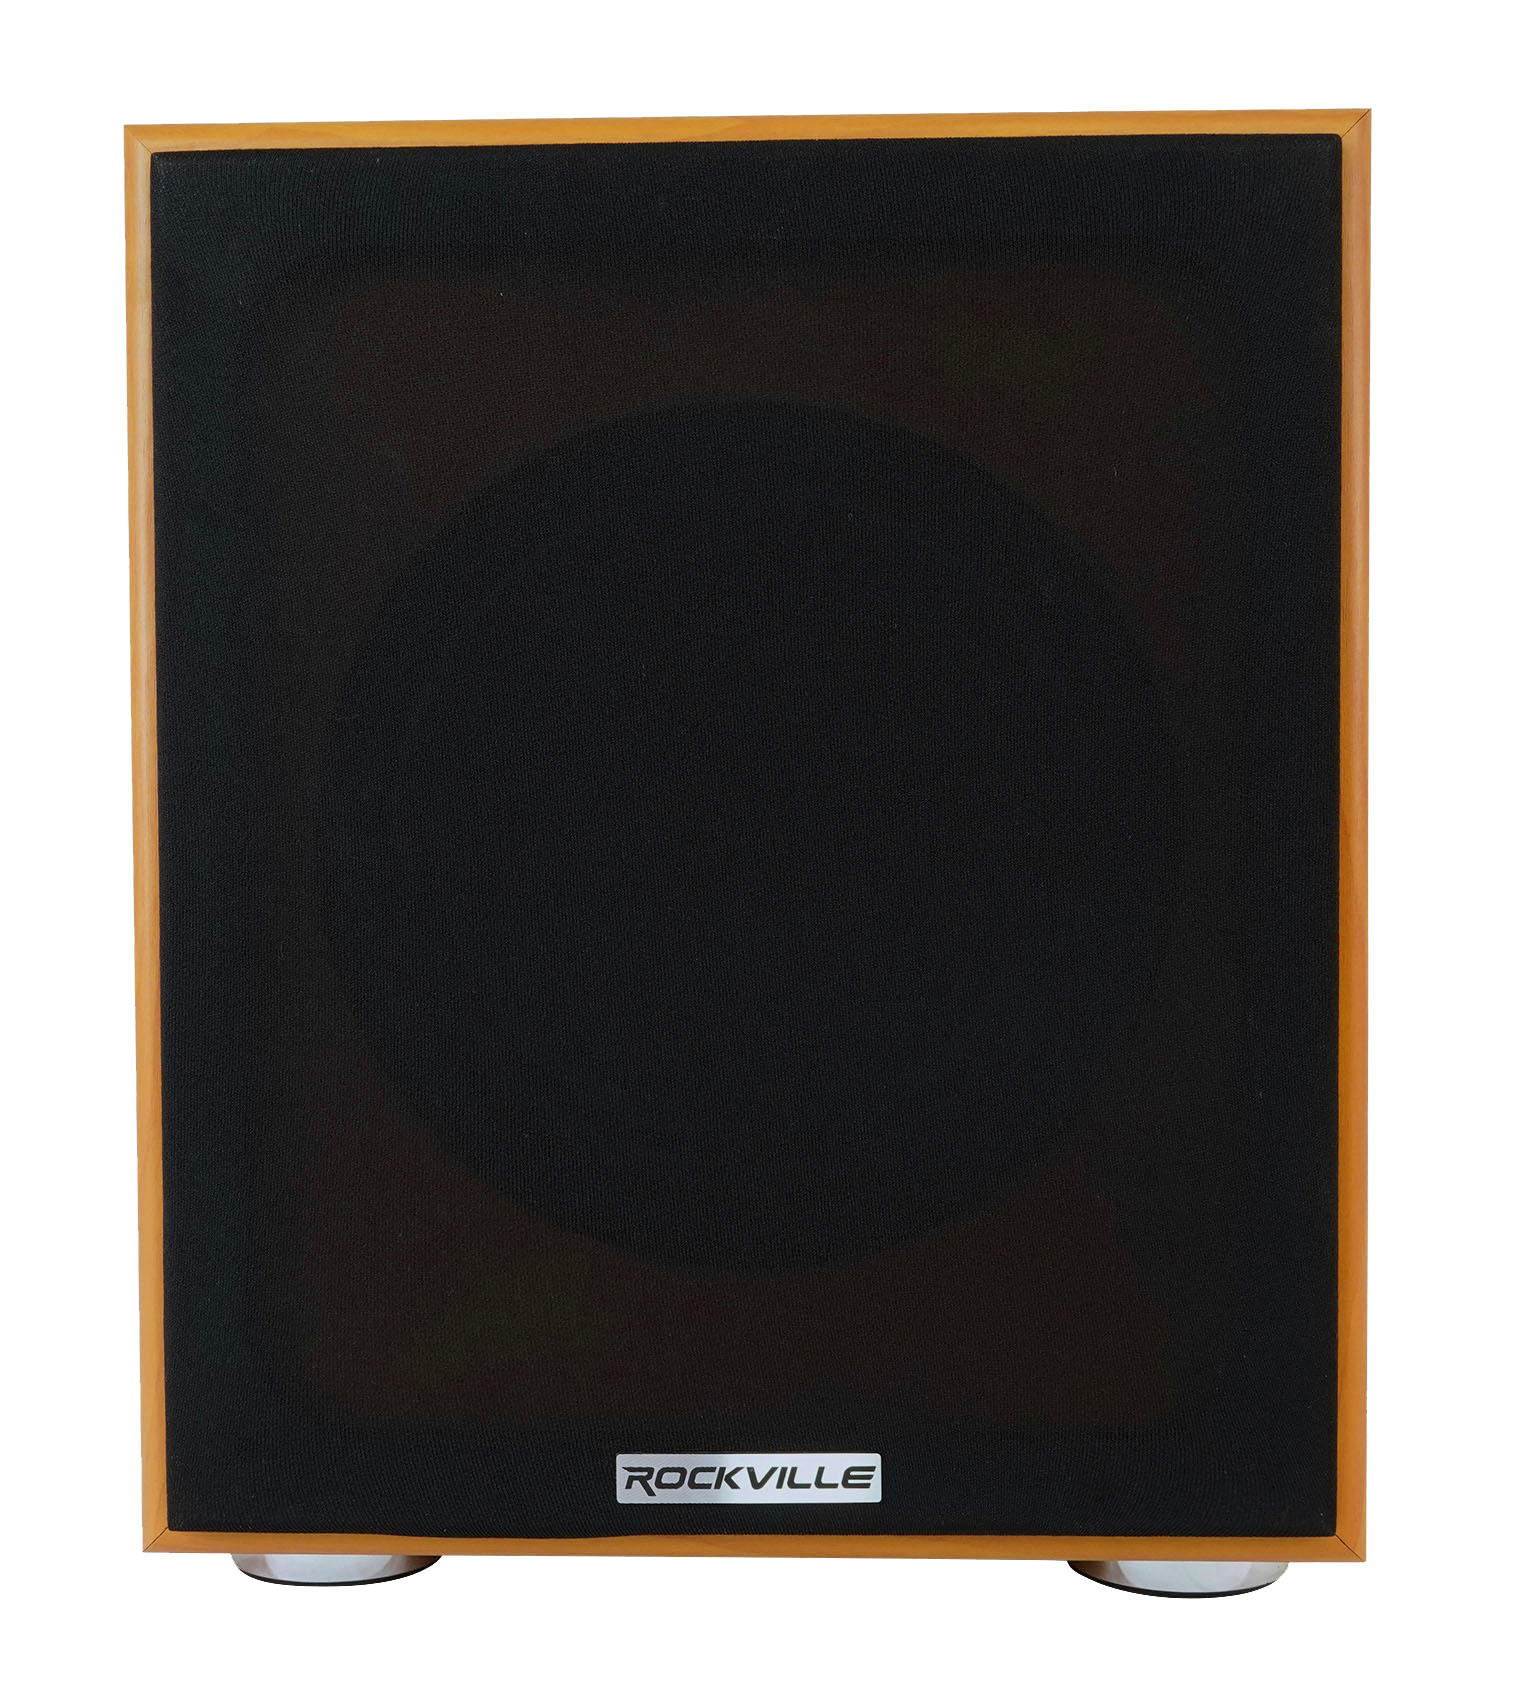 Rockville Rock Shaker 8" Classic Wood 400w Powered Home Theater Subwoofer Sub - image 2 of 10